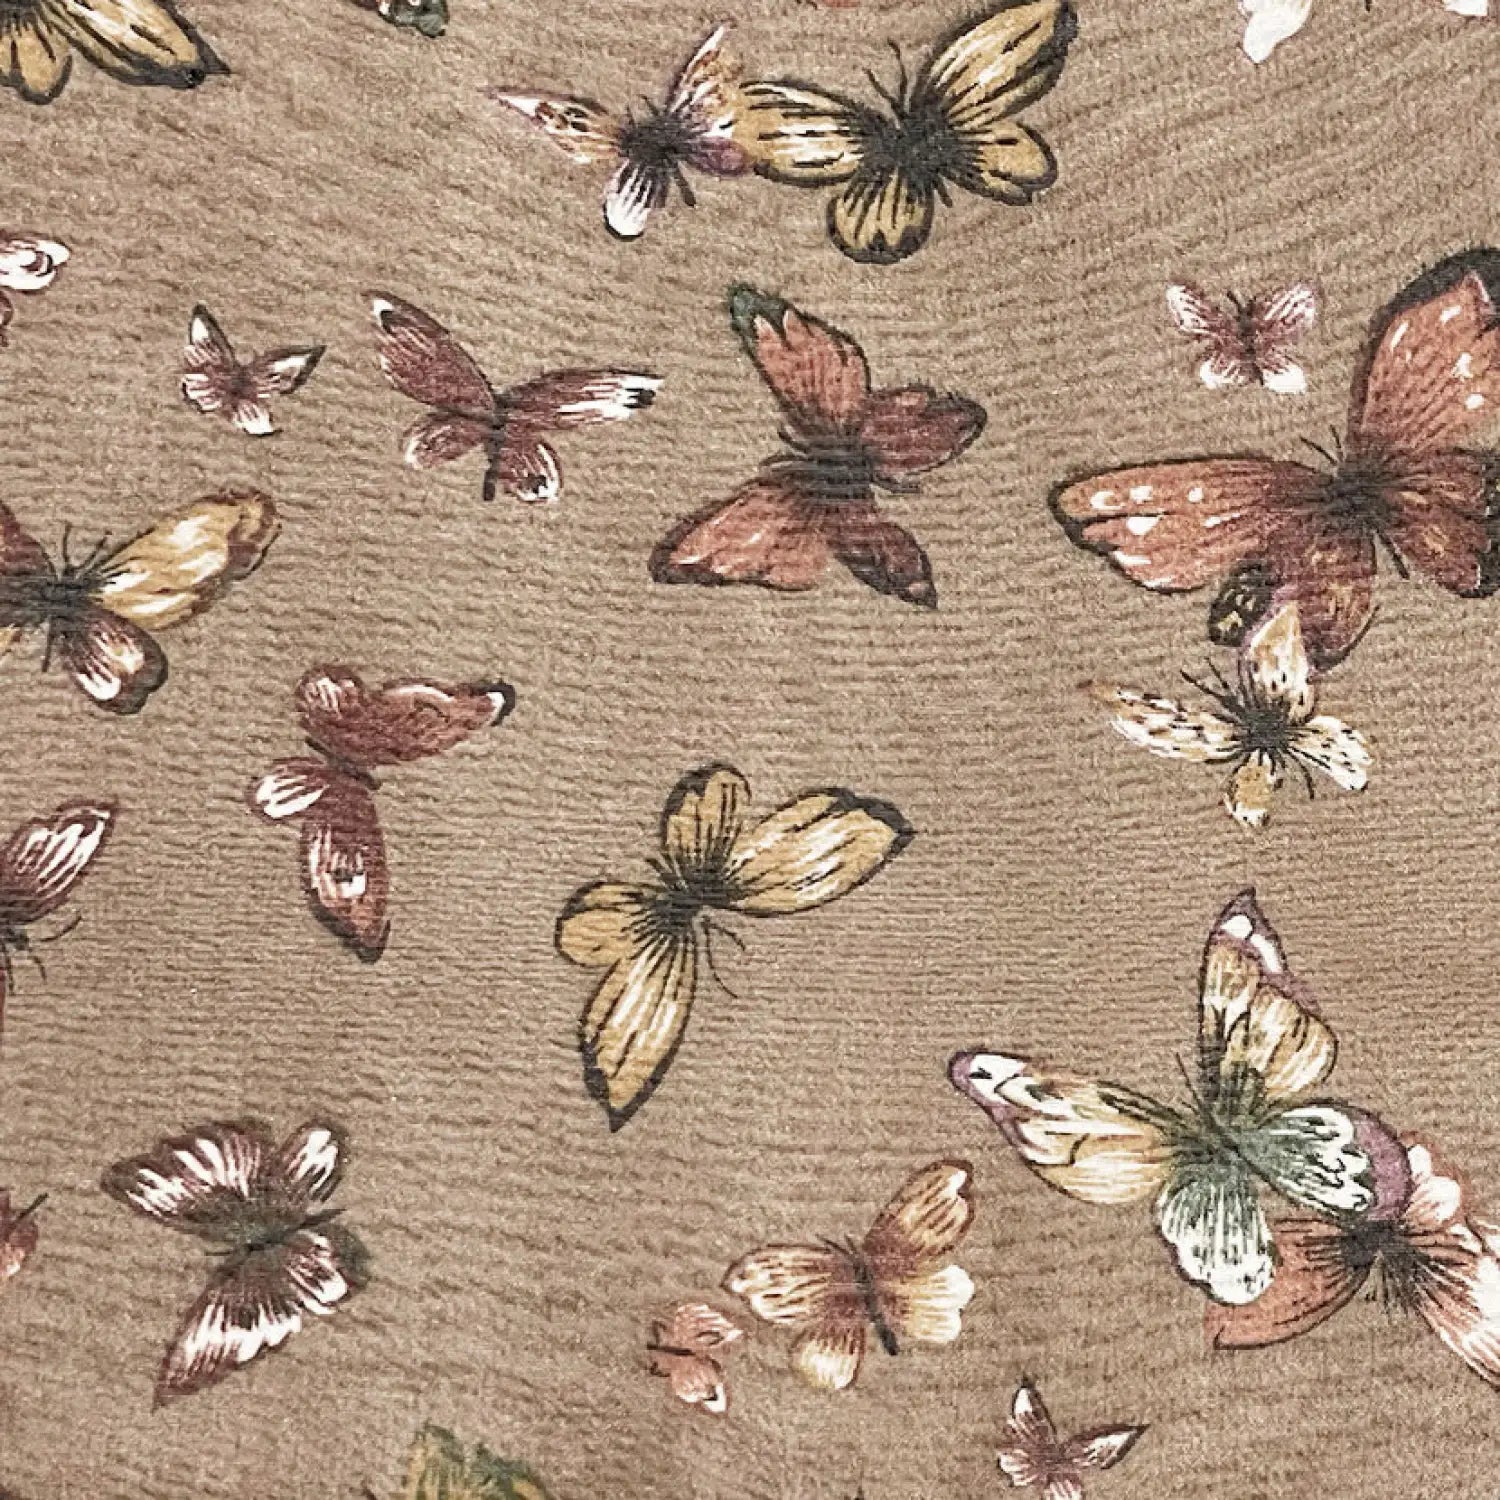 Butterfly print scarf on beige background